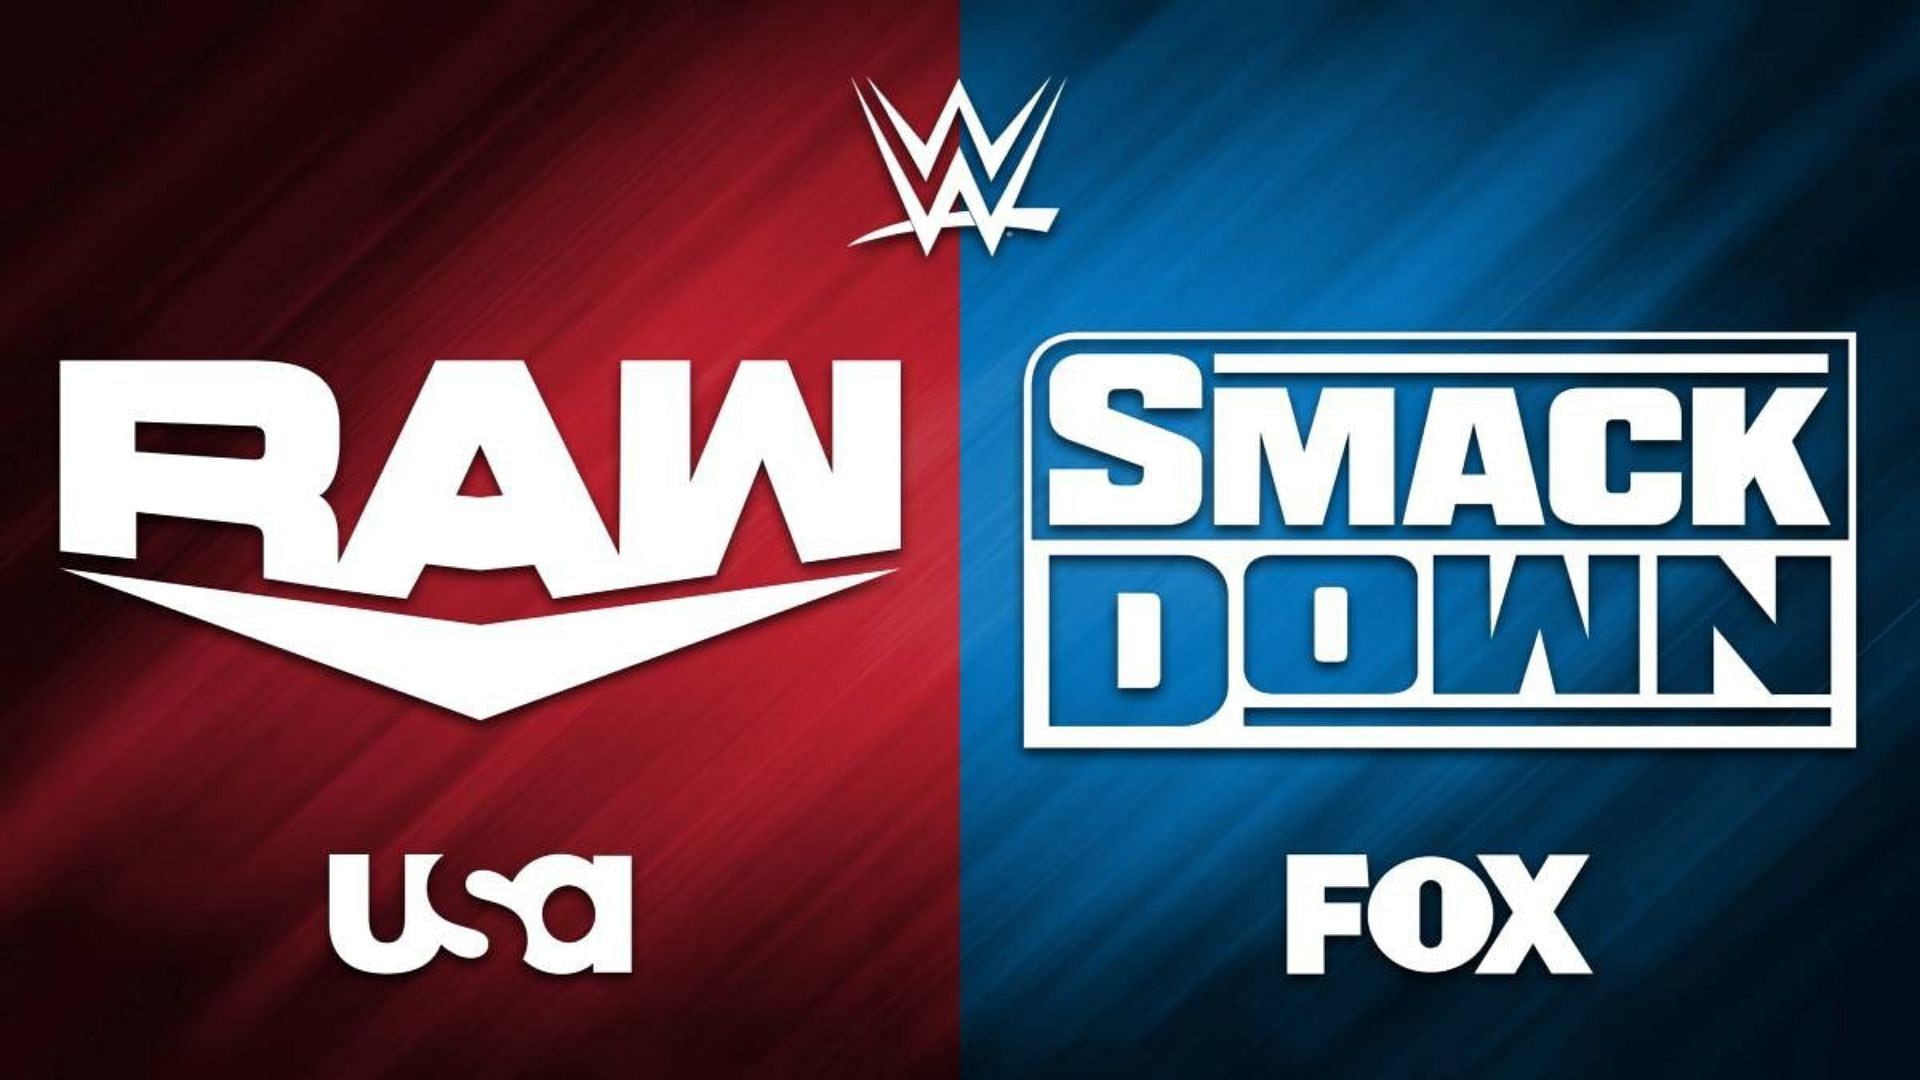 WWE RAW and SmackDown are the primary shows in the company!